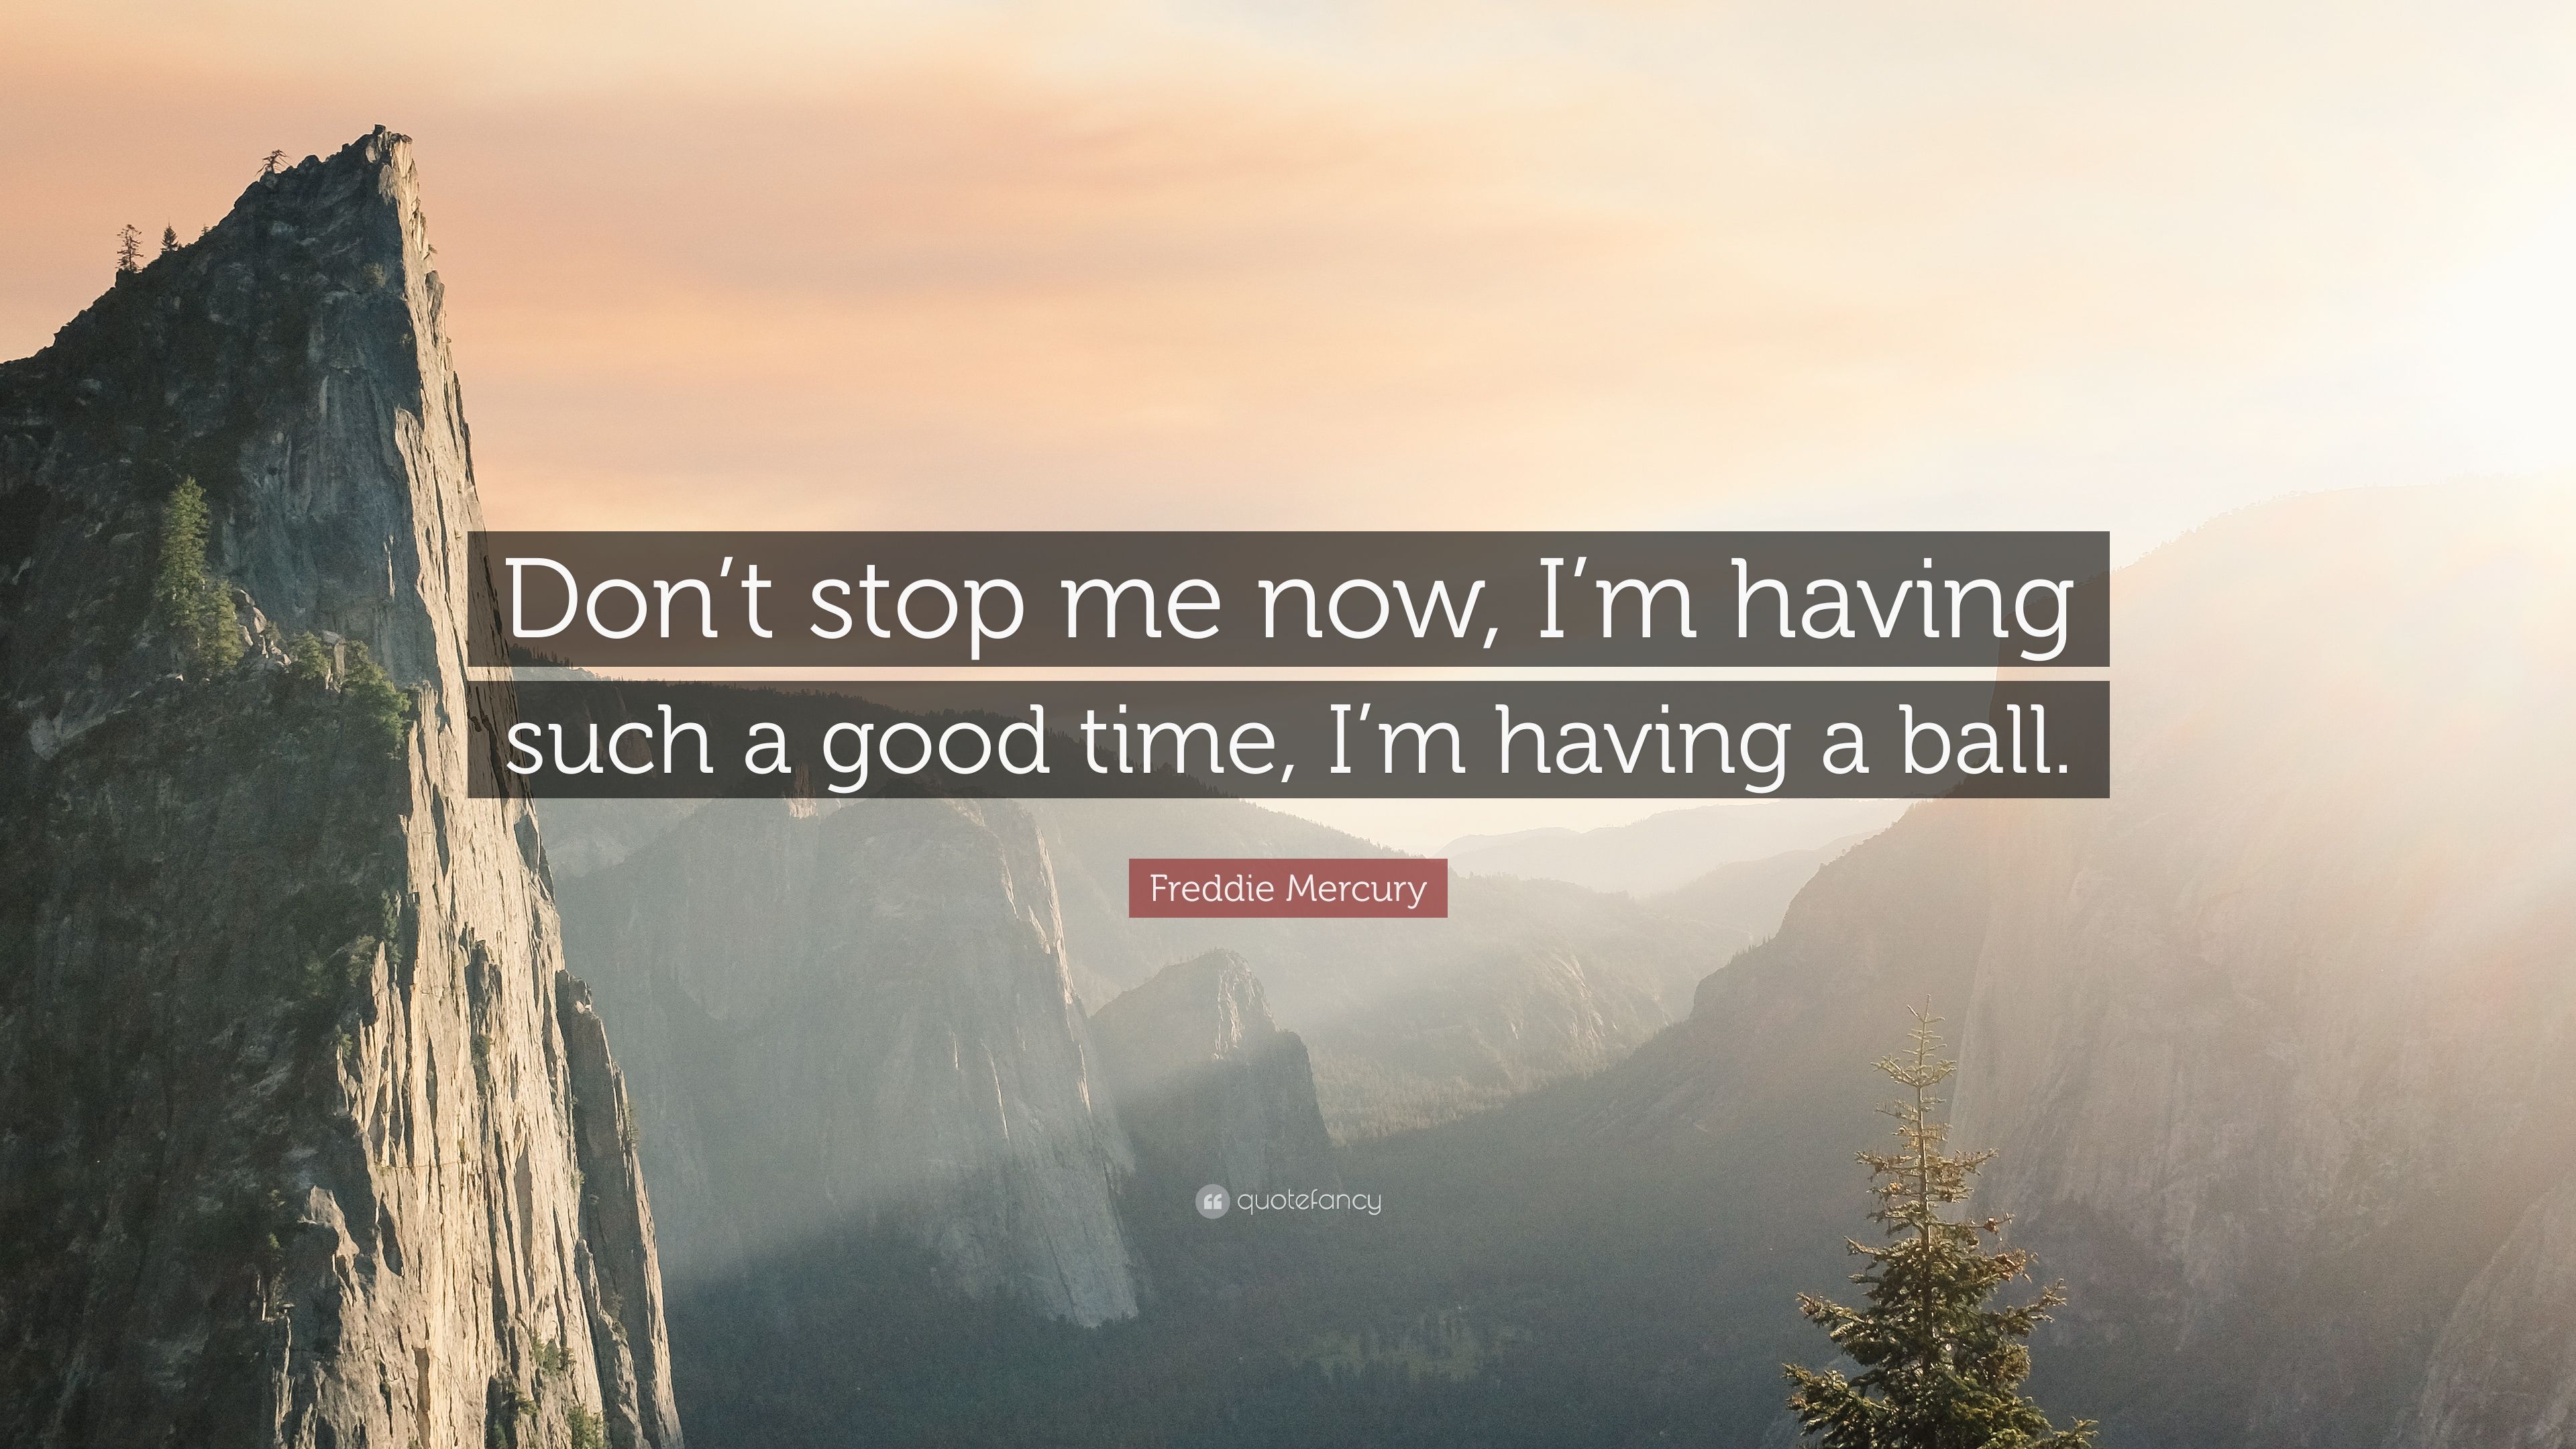 Freddie Mercury Quote: “Don't stop me now, I'm having such a good time, I'm having a ball.” (7 wallpaper)